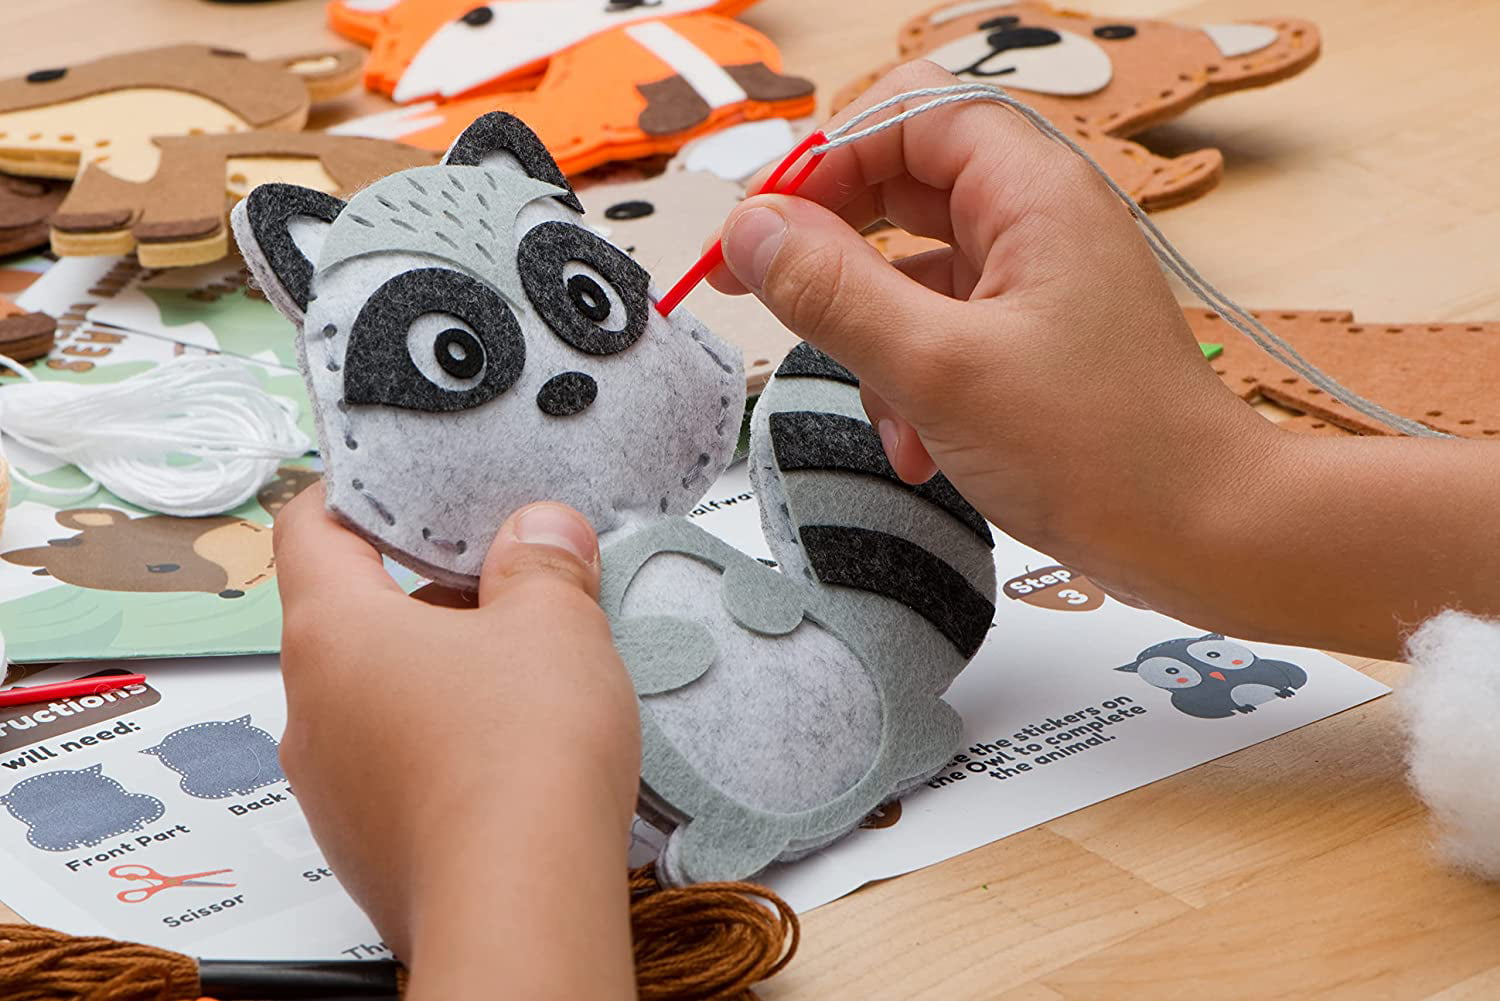  Dezzy's Workshop Sewing Kit for Kids - Woodland Animals Kids  Sewing Kit - Make Your Own Stuffed Animal Kit - Felt Stitch Art and Craft  Toys for Boys and Girls 